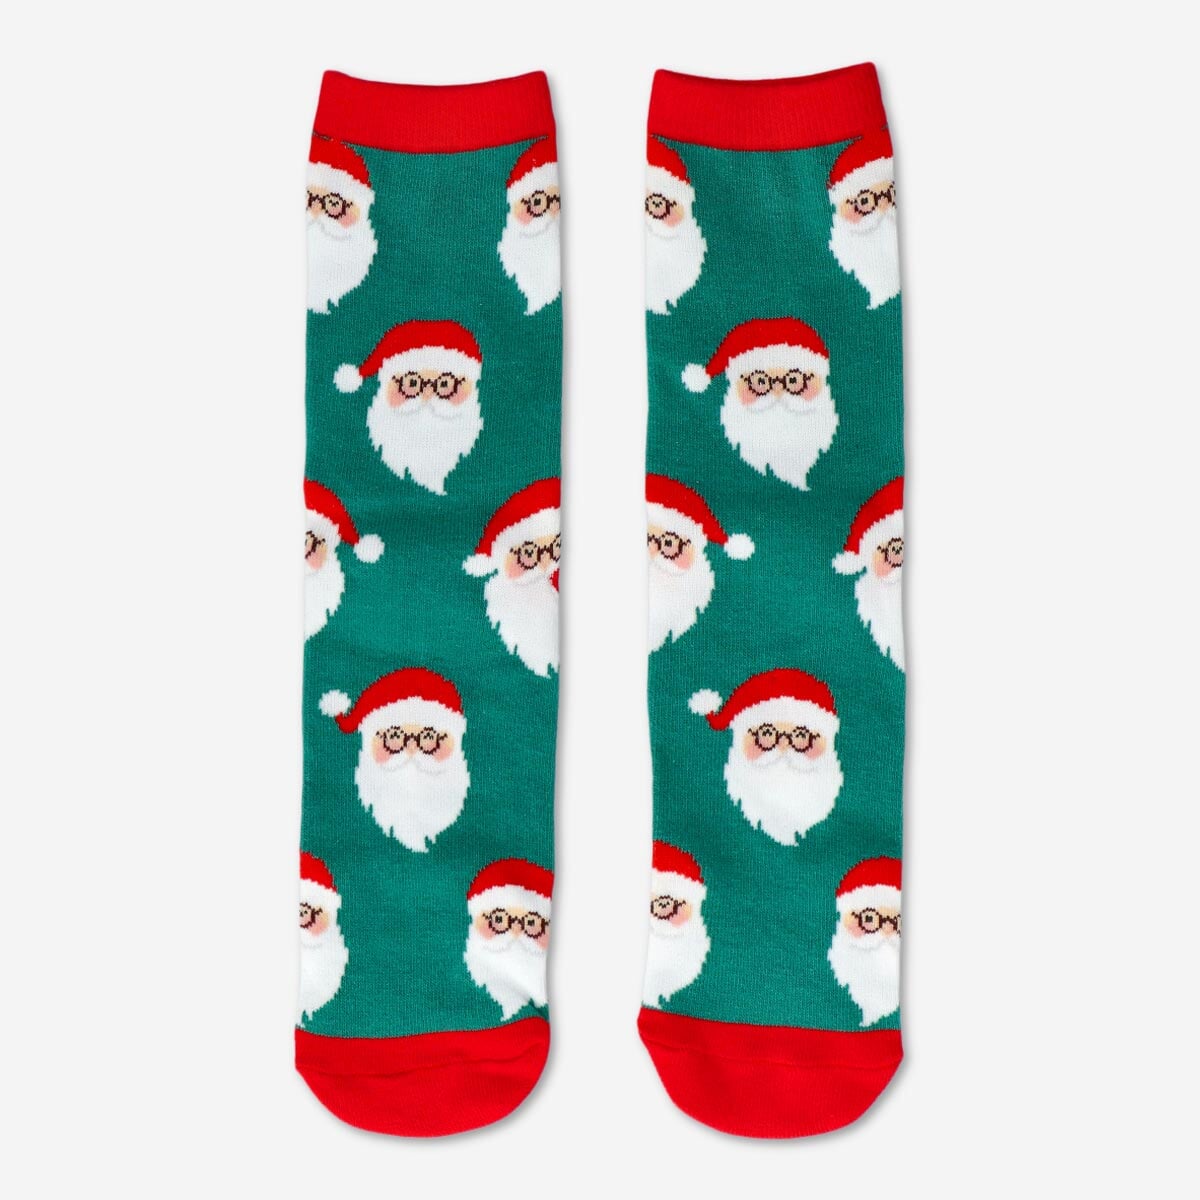 Your Xmas BFF: The sock enthusiast